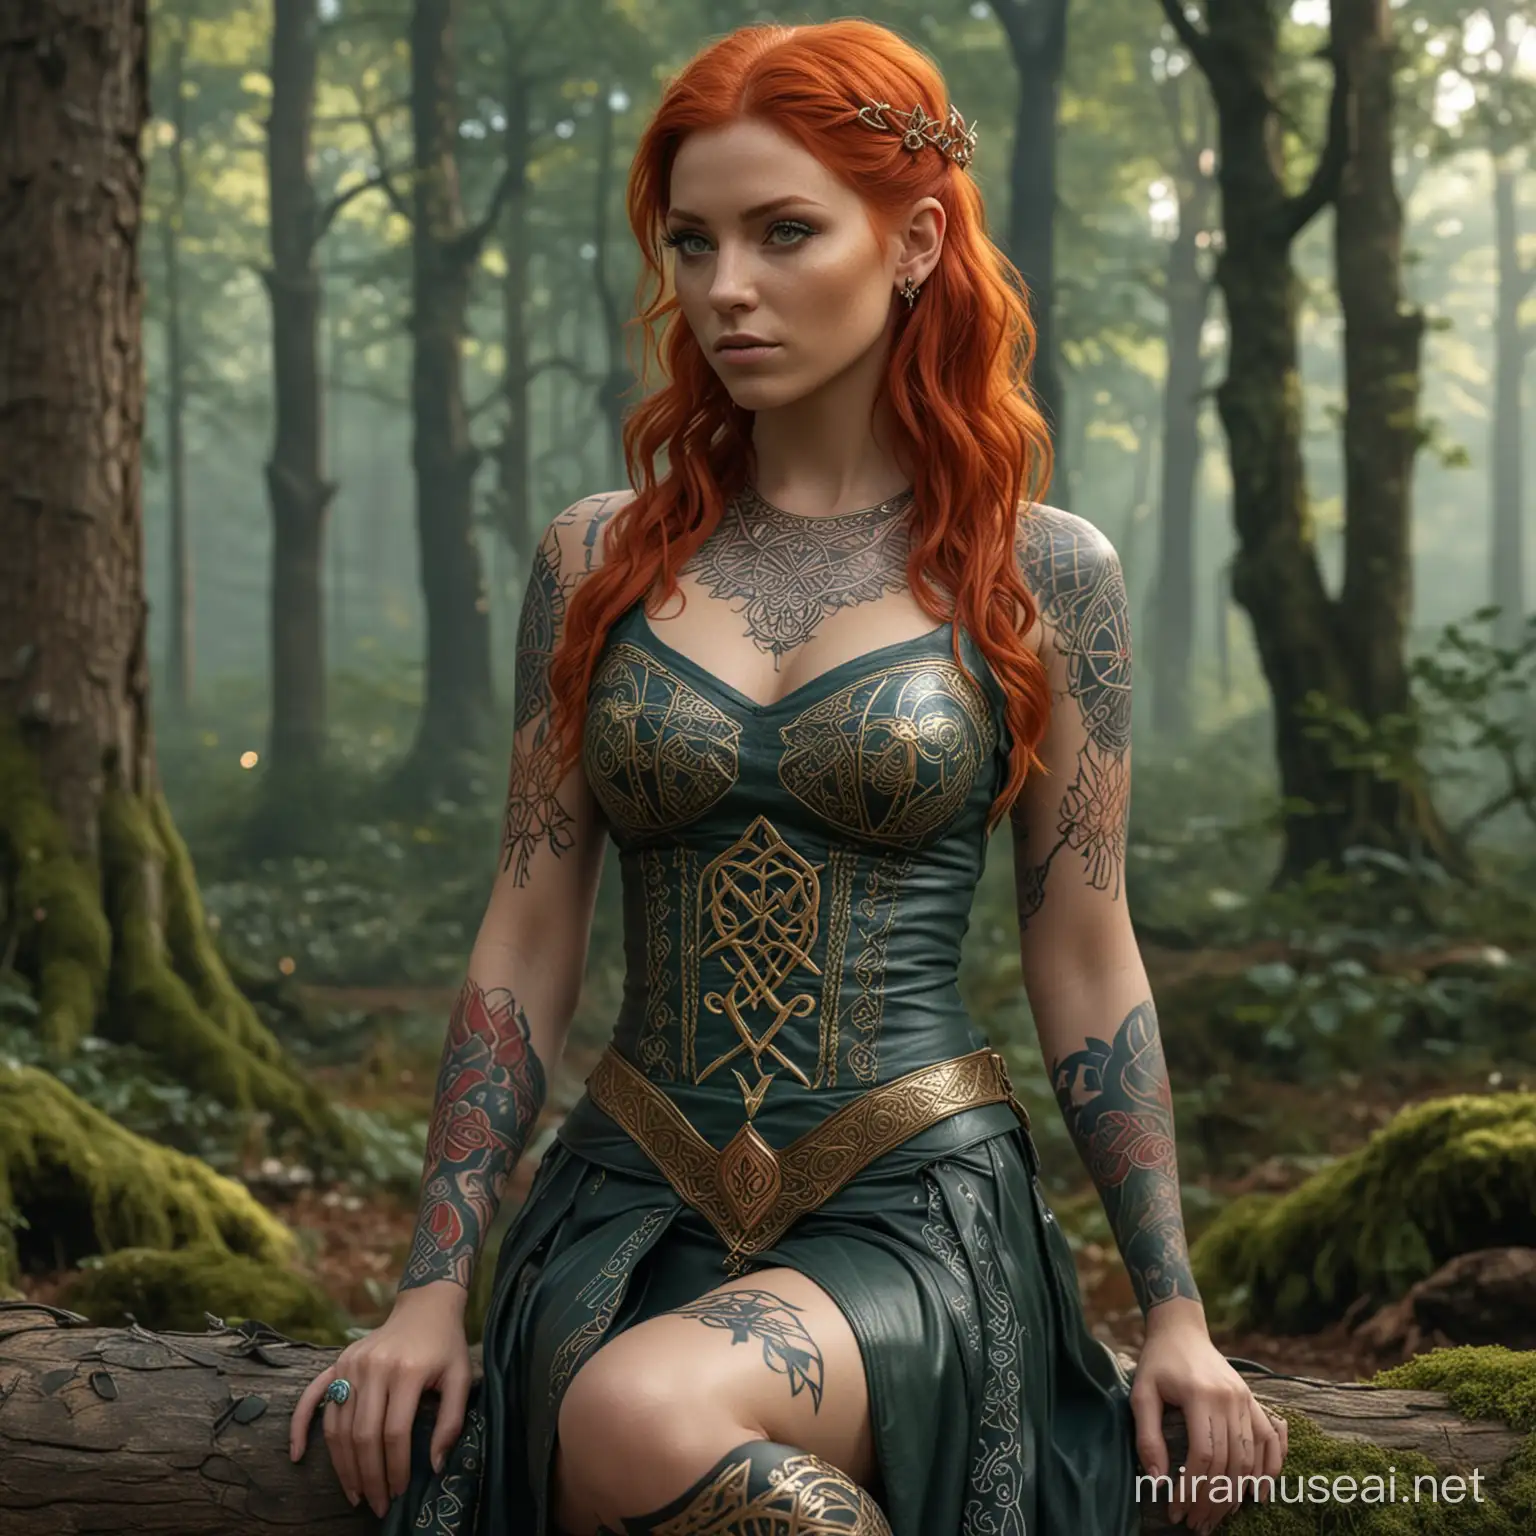 ultrarealistic high detail 4k full body long shot showing an anatomically correct female human with fiery red hair decorated with silver, colourful draconic symbols tattooed on arms, wearing a small green sleeveless open front leather top engraved with celtic runes in gold, with a loose short blue skirt embroided with colourful elven symbols, sitting in a forest